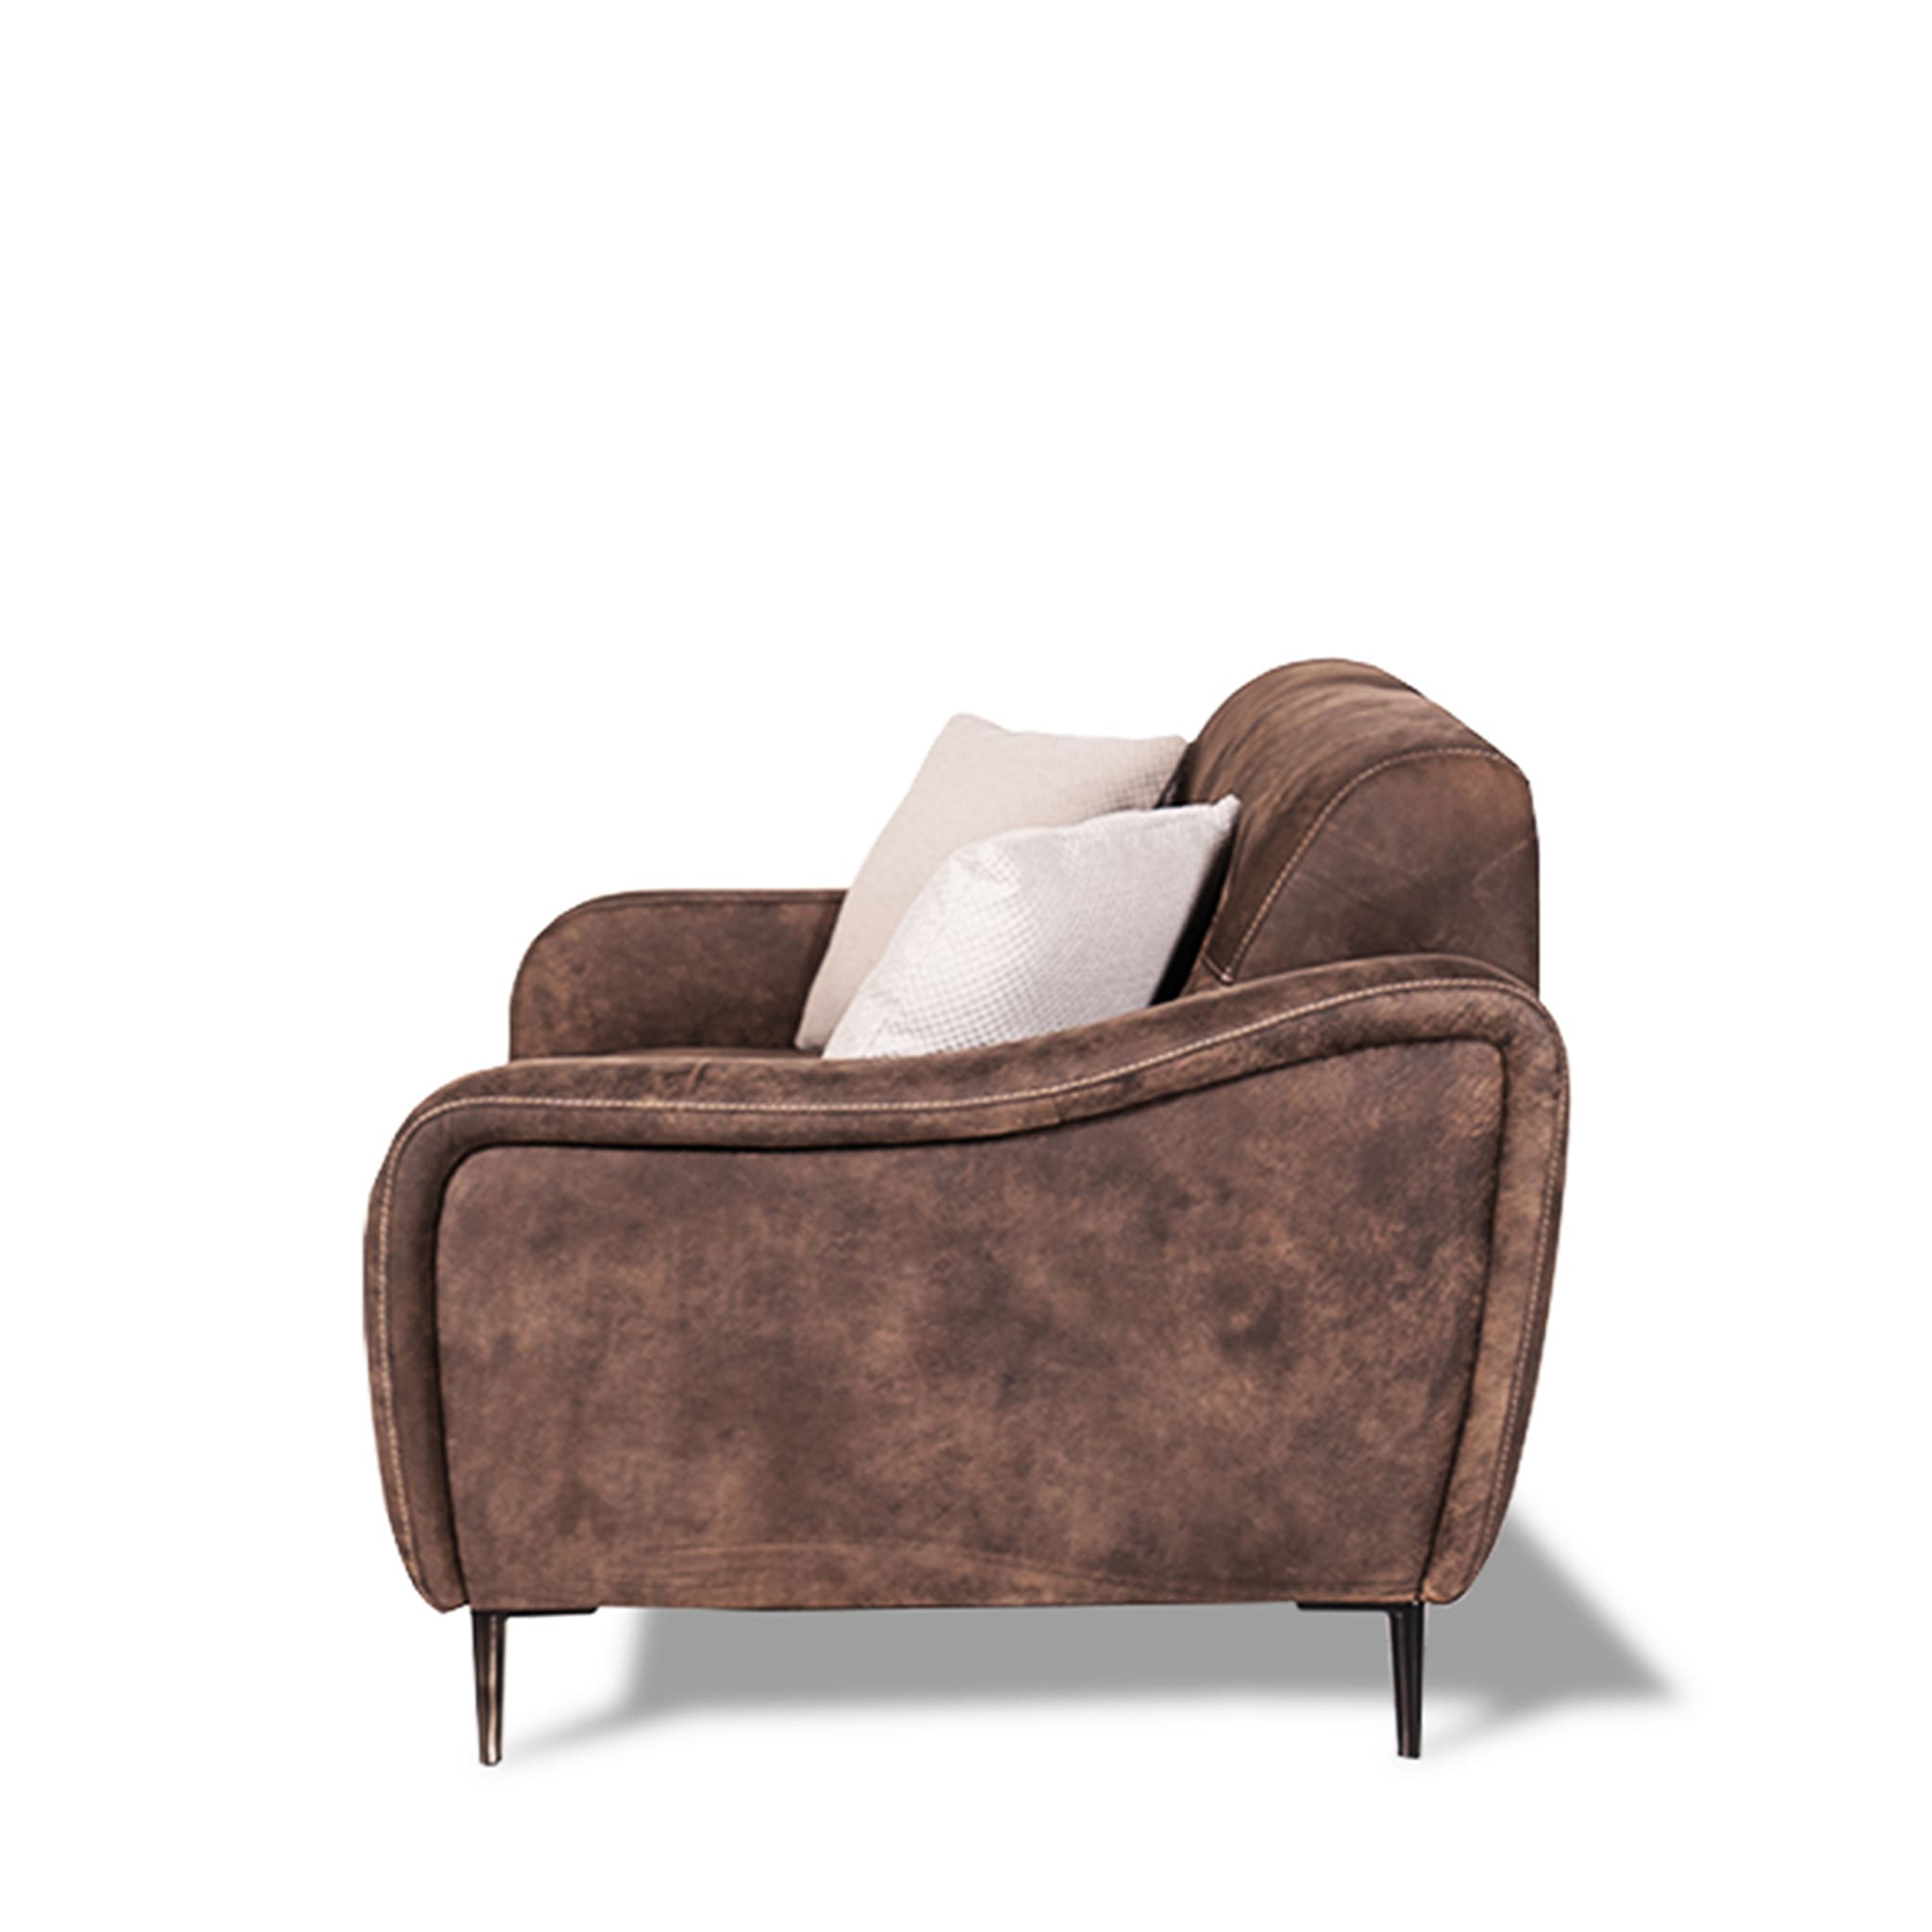 Fonzie Brown Leather 2-Seater Sofa Tribeca Collection - Alternative view 2